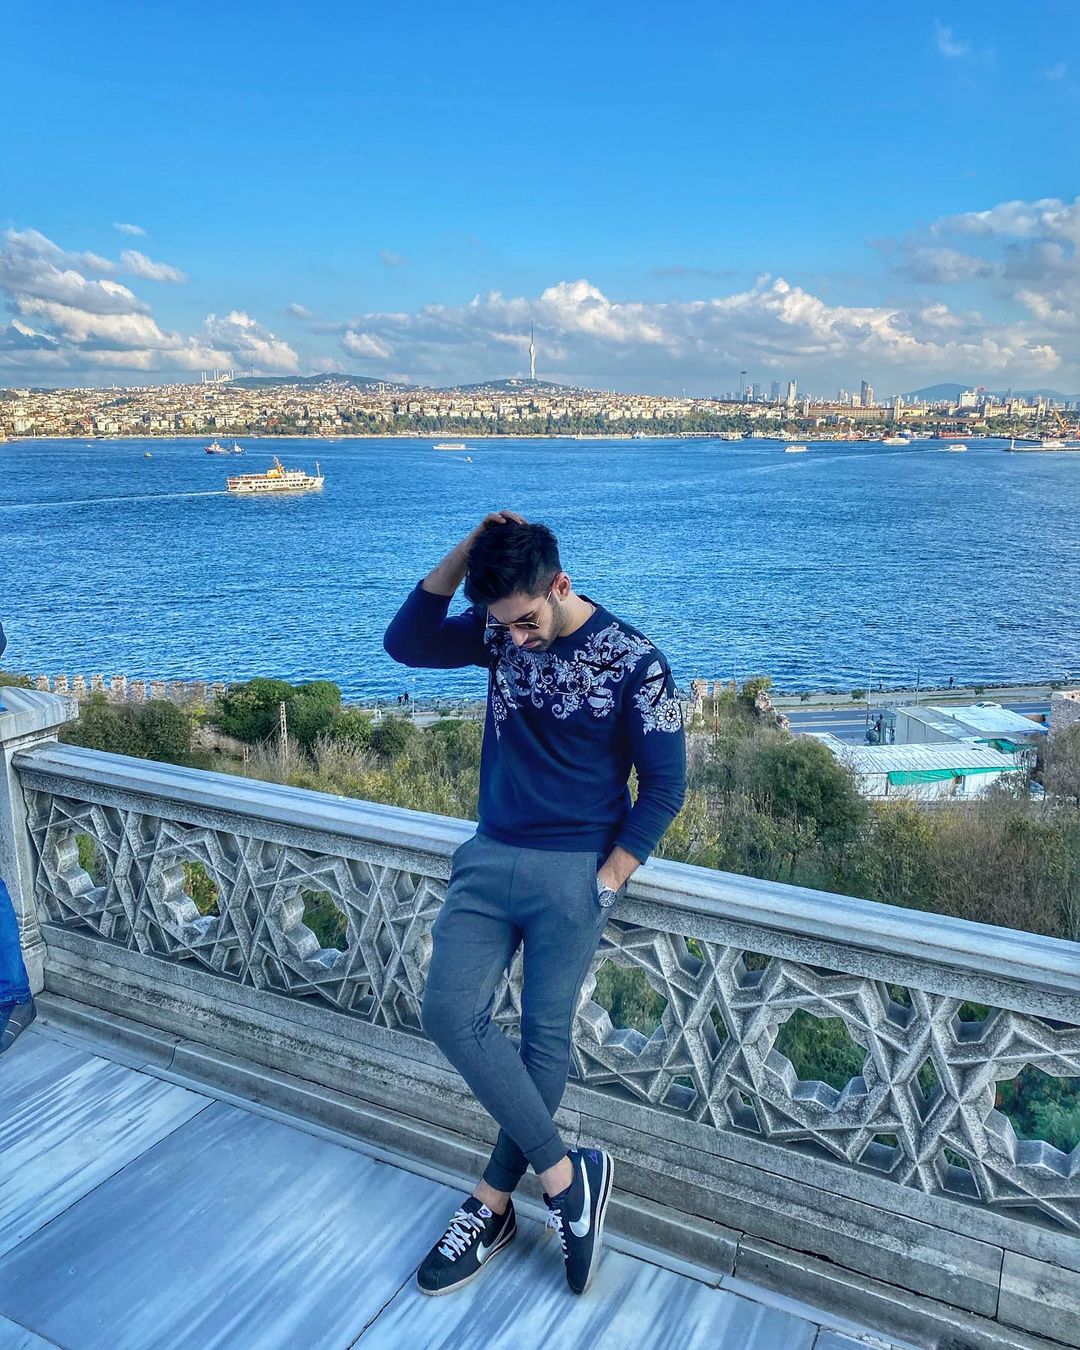 Aiman Khan and Muneeb Butt in Turkey - Day 2